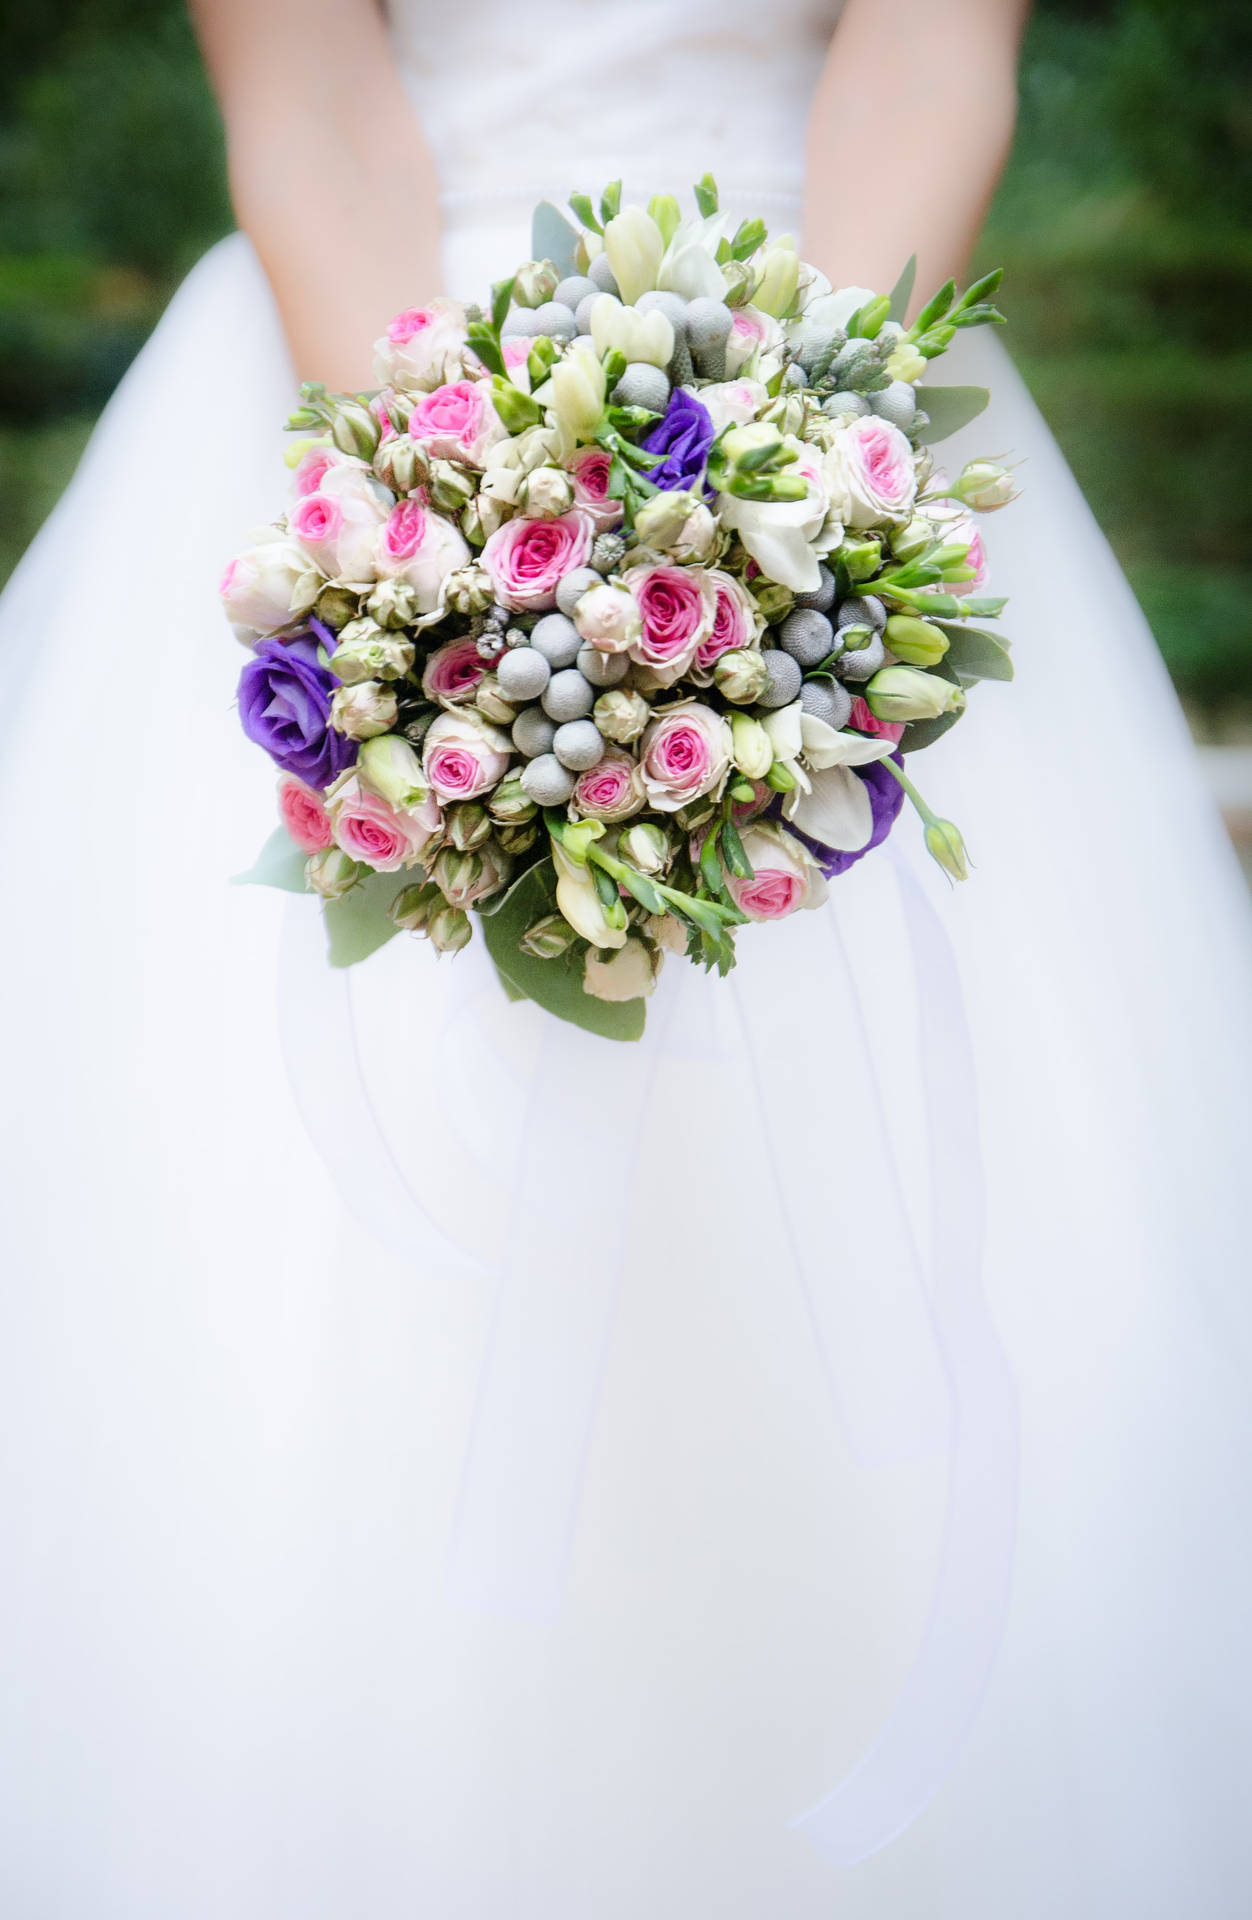 Caption: Serene Beauty of White Tulips and Blush & Blue Roses Bouquet Wallpaper